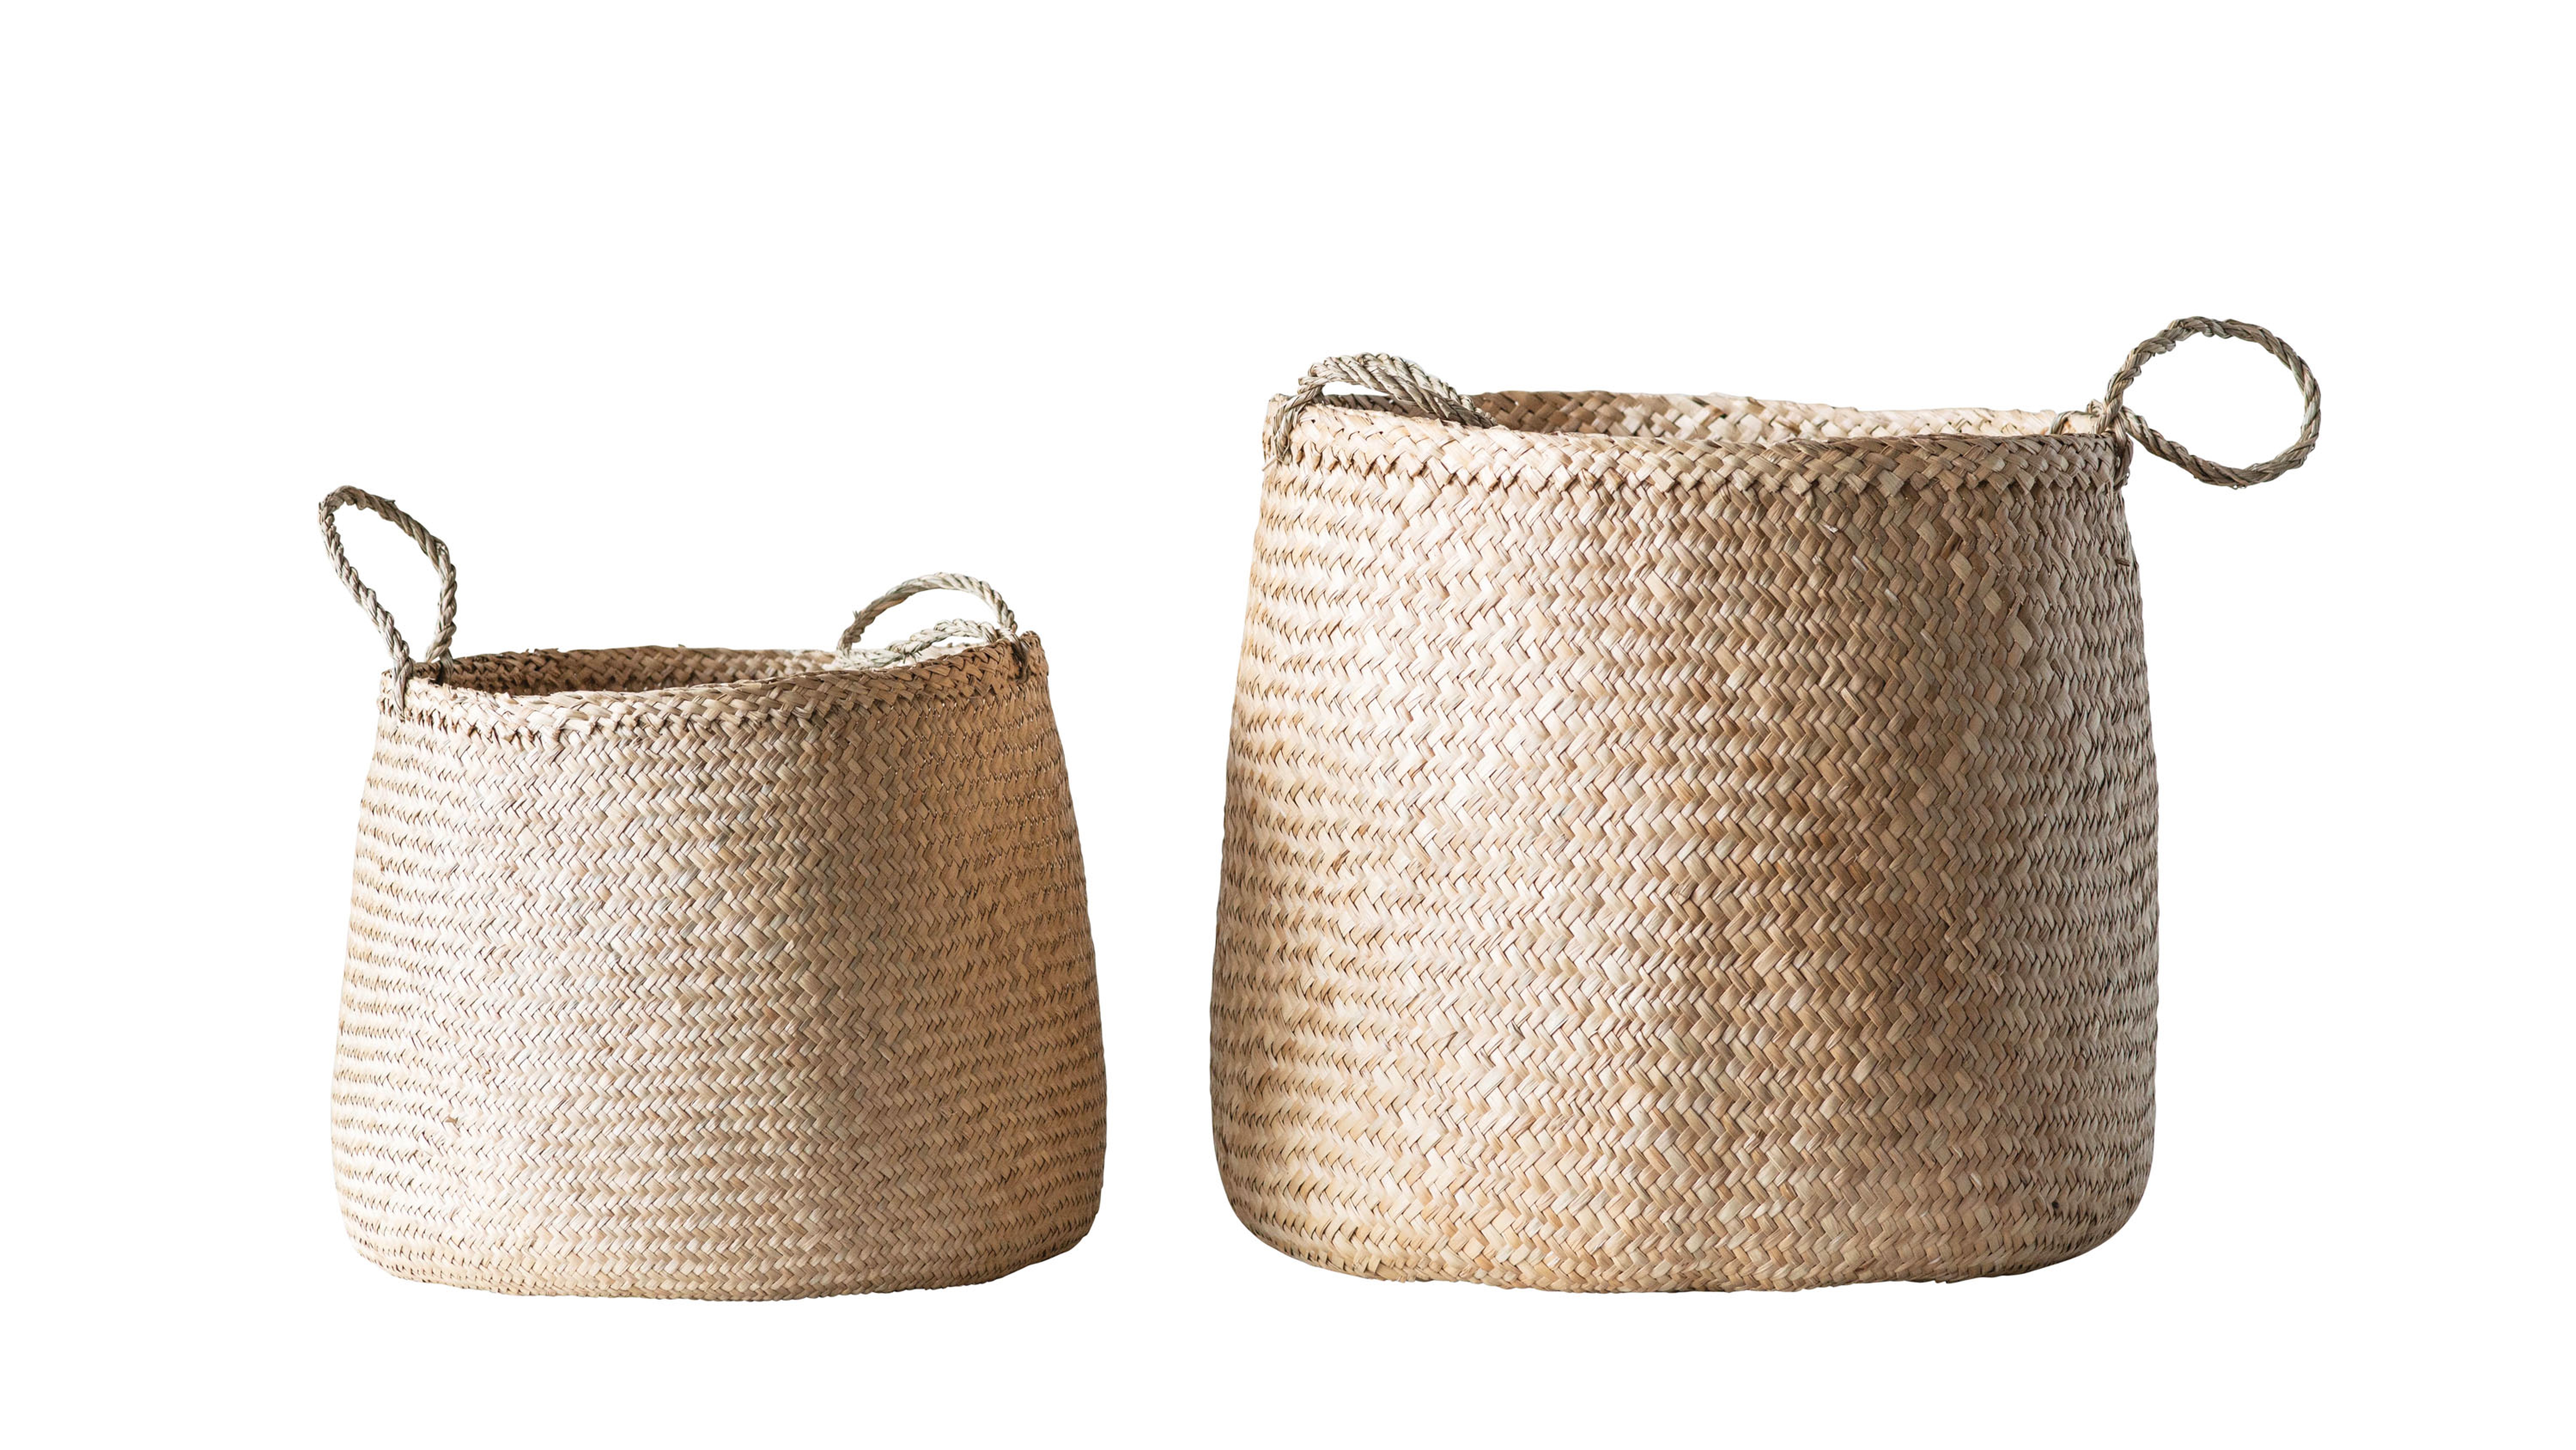 Beige Woven Seagrass Basket with Handles (Set of 2) - Nomad Home